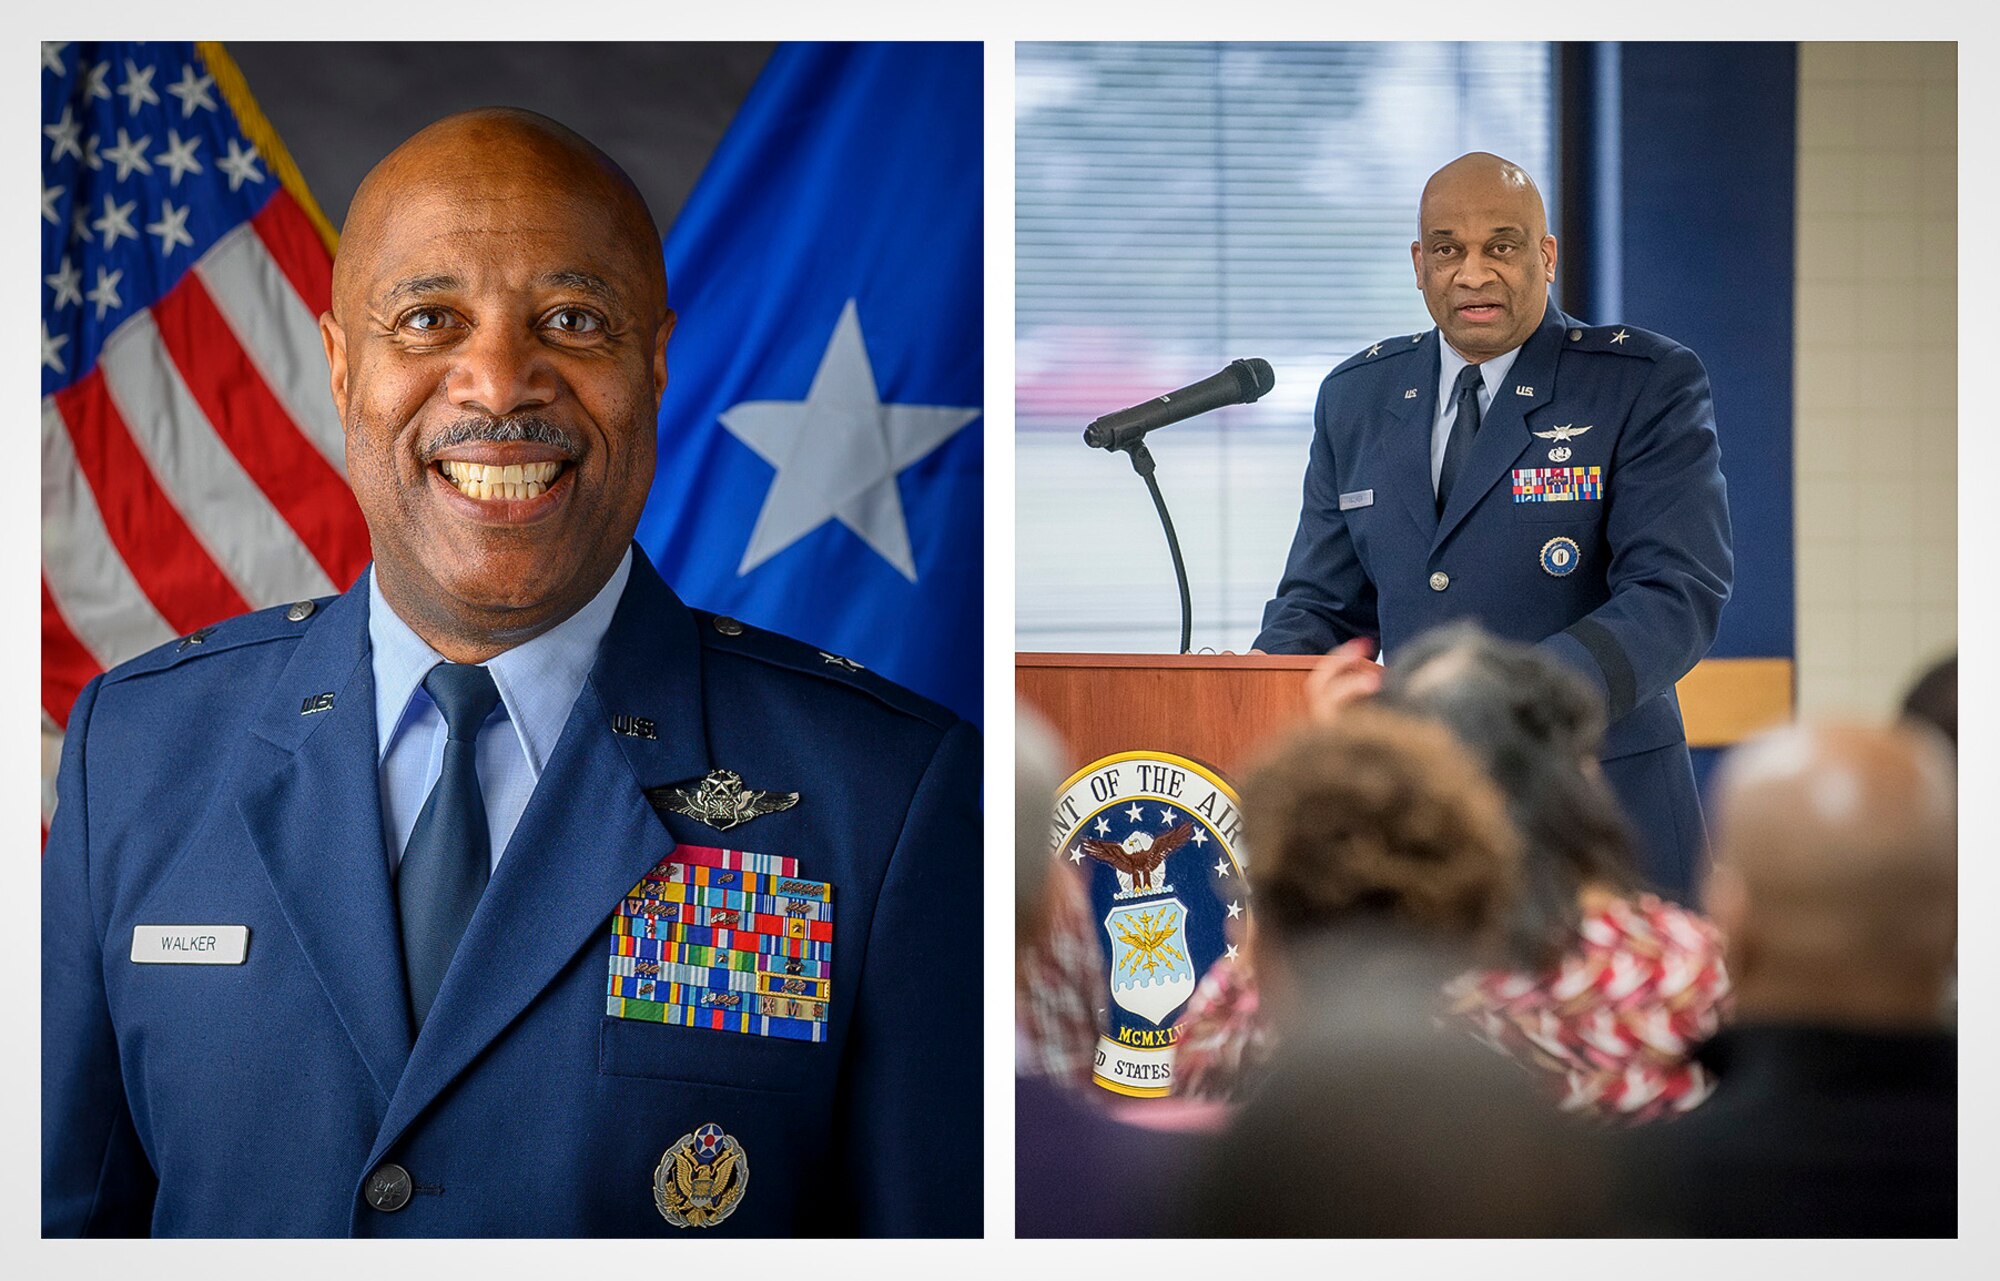 U.S. Air Force Brig. Gen. Christopher ‘Mookie’ Walker, left, special assistant to the Air National Guard director on diversity and inclusion, and Brig. Gen. Charles ‘Chuck’ Walker, right, director, Office of Complex Investigations, National Guard Bureau, both volunteered to be speed mentors during the virtual 2021 Black Engineer of the Year Awards (BEYA) Science, Technology, Engineering, and Mathematics (STEM) Conference Feb. 12, 2021. The BEYA STEM Conference brings together K-12 and college students from across the nation to learn about STEM career opportunities and network with private industry experts, government leaders, and military professionals. (Photo illustration by Tech. Sgt. Morgan R. Whitehouse) (Two courtesy photos a border was added to create this image.)